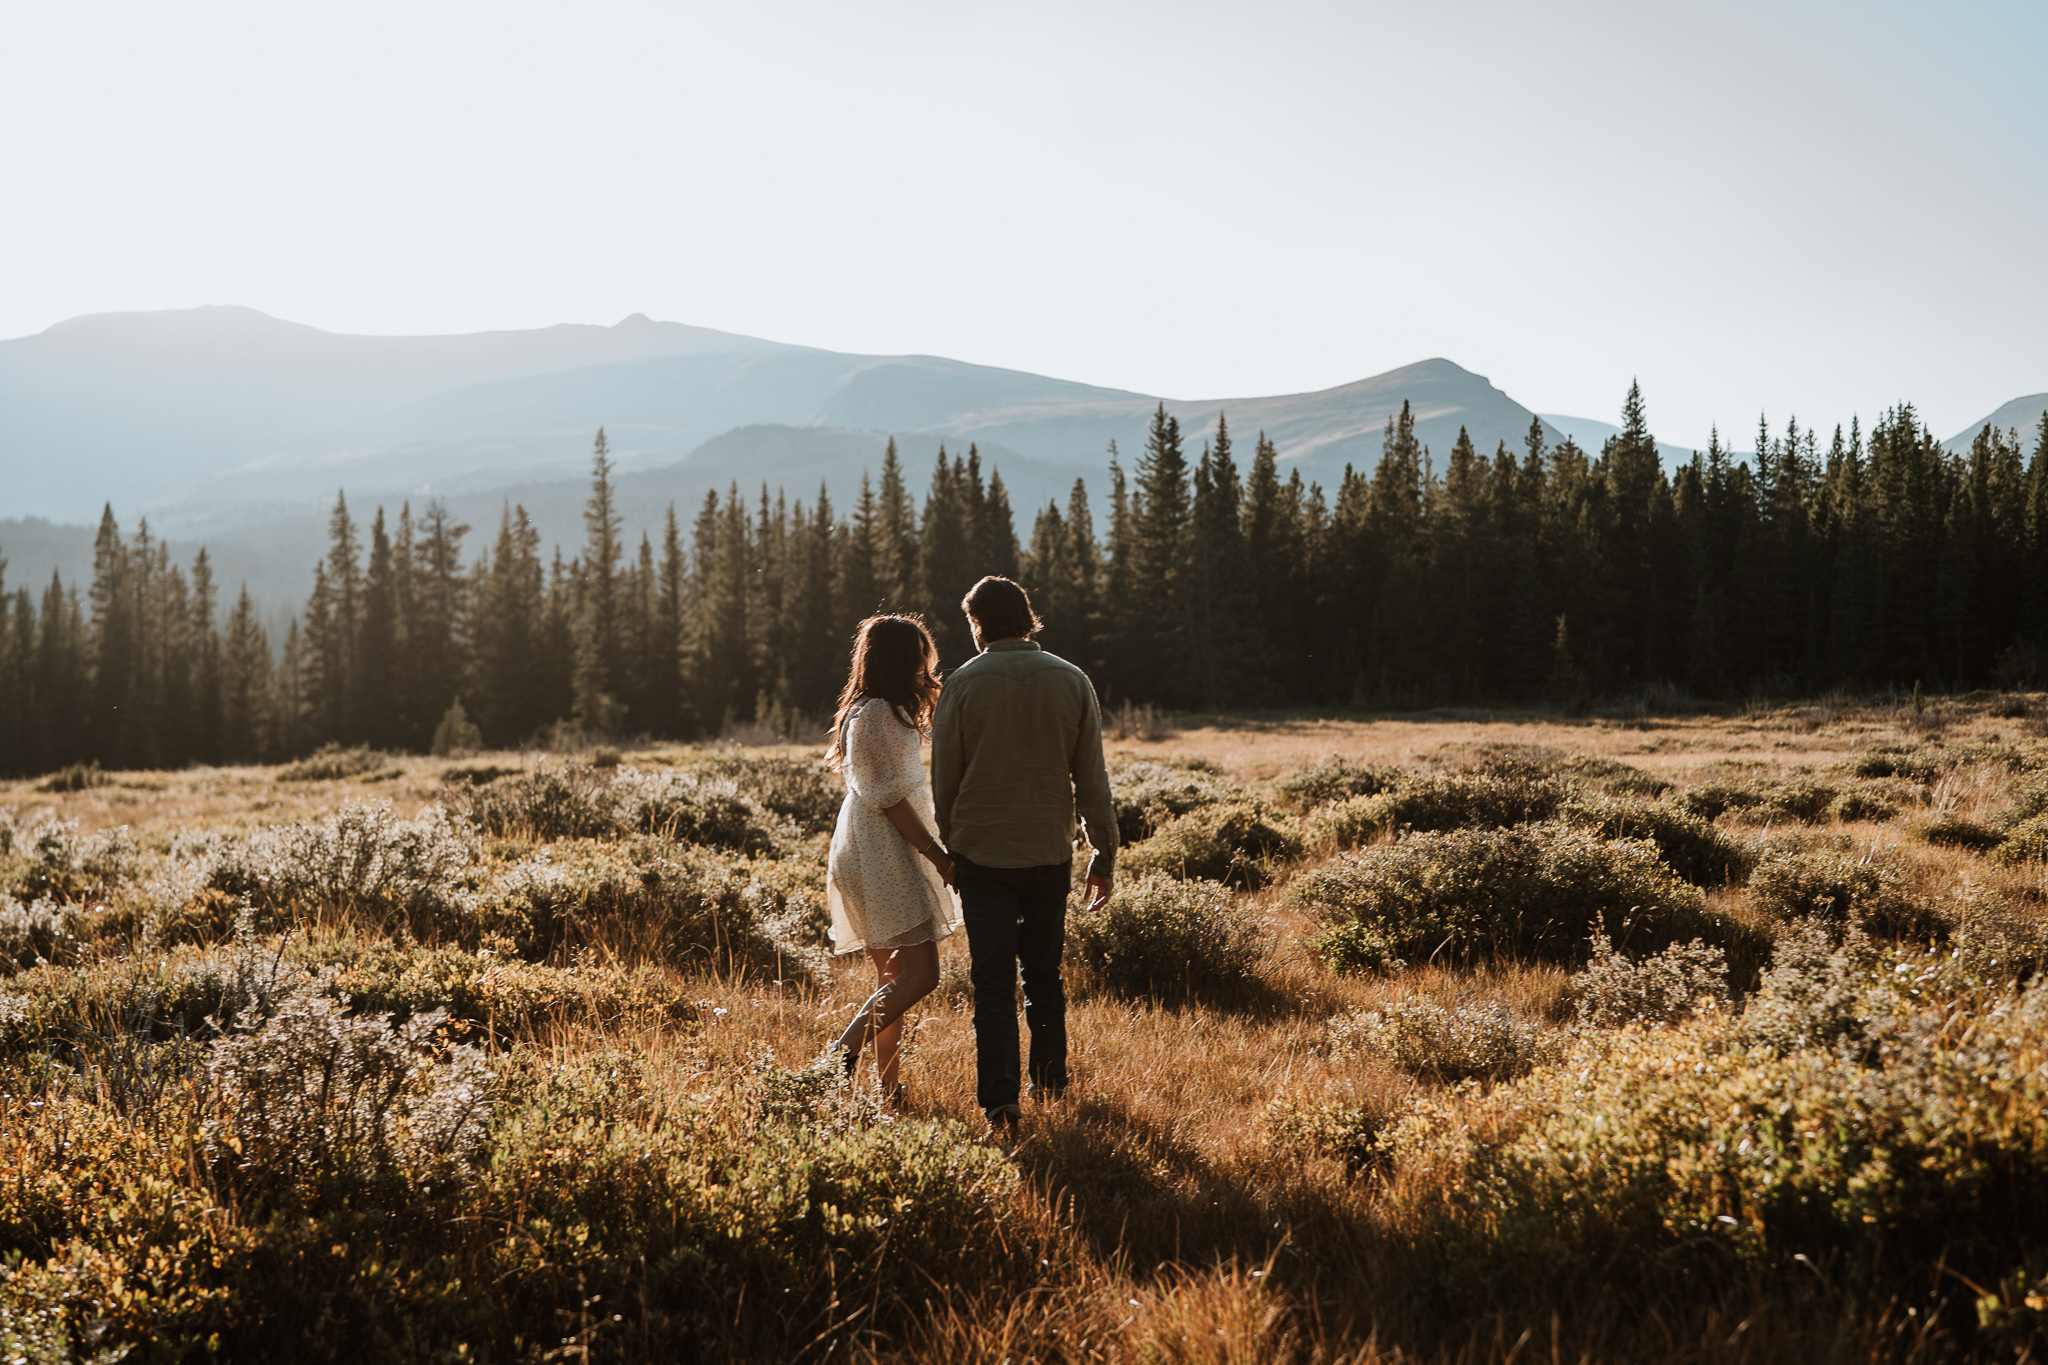 Engagement session in a mountain meadow.